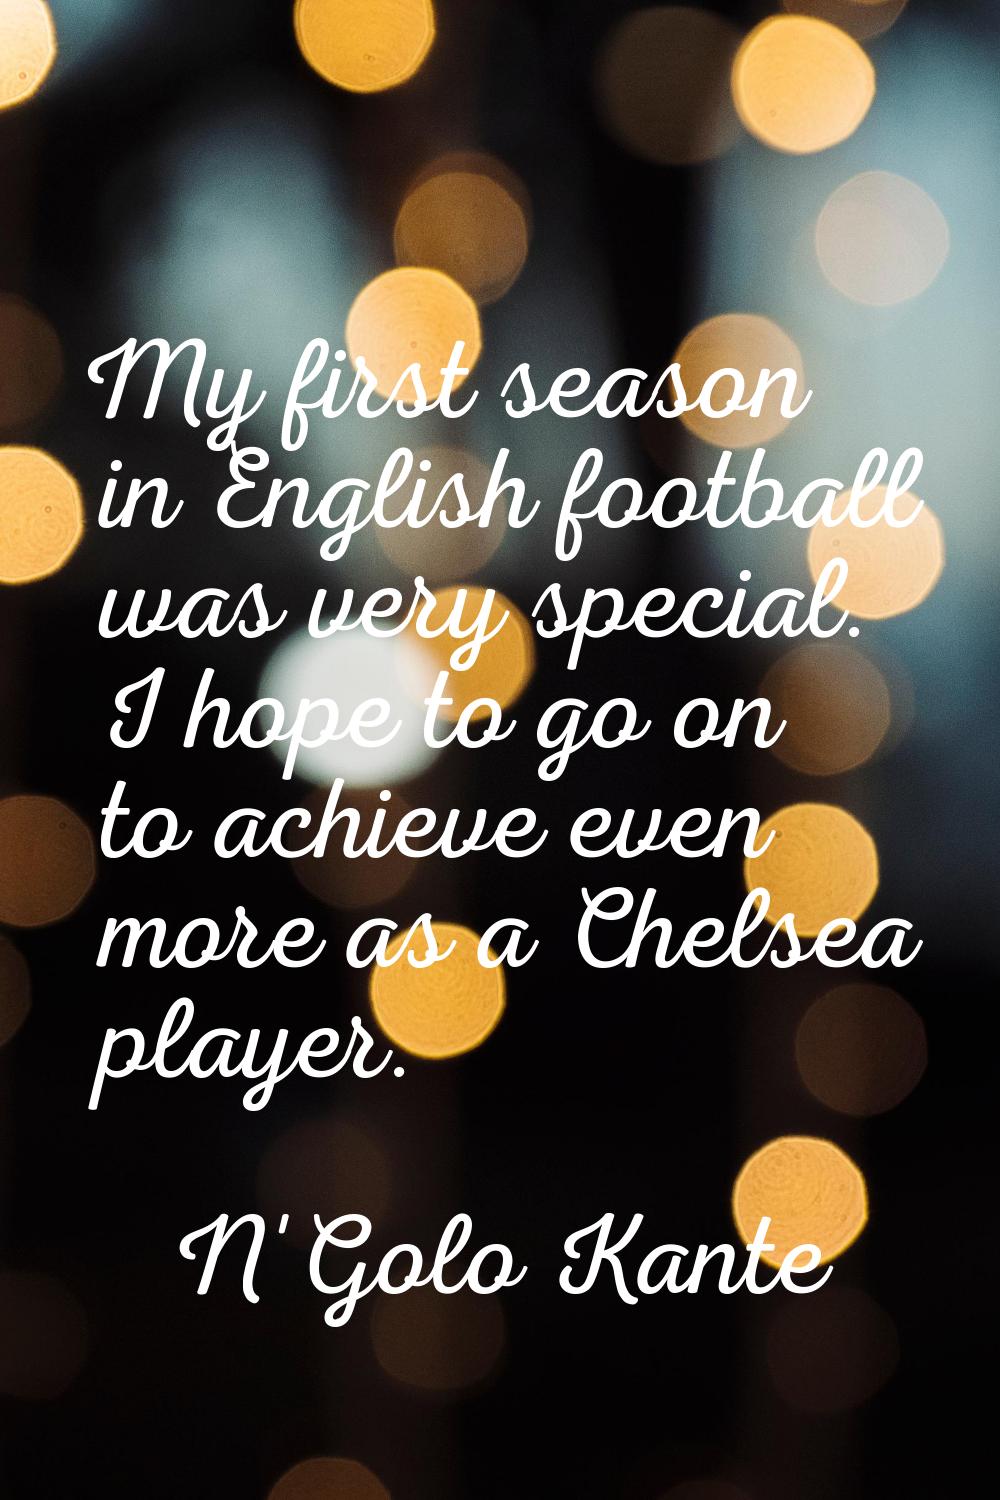 My first season in English football was very special. I hope to go on to achieve even more as a Che